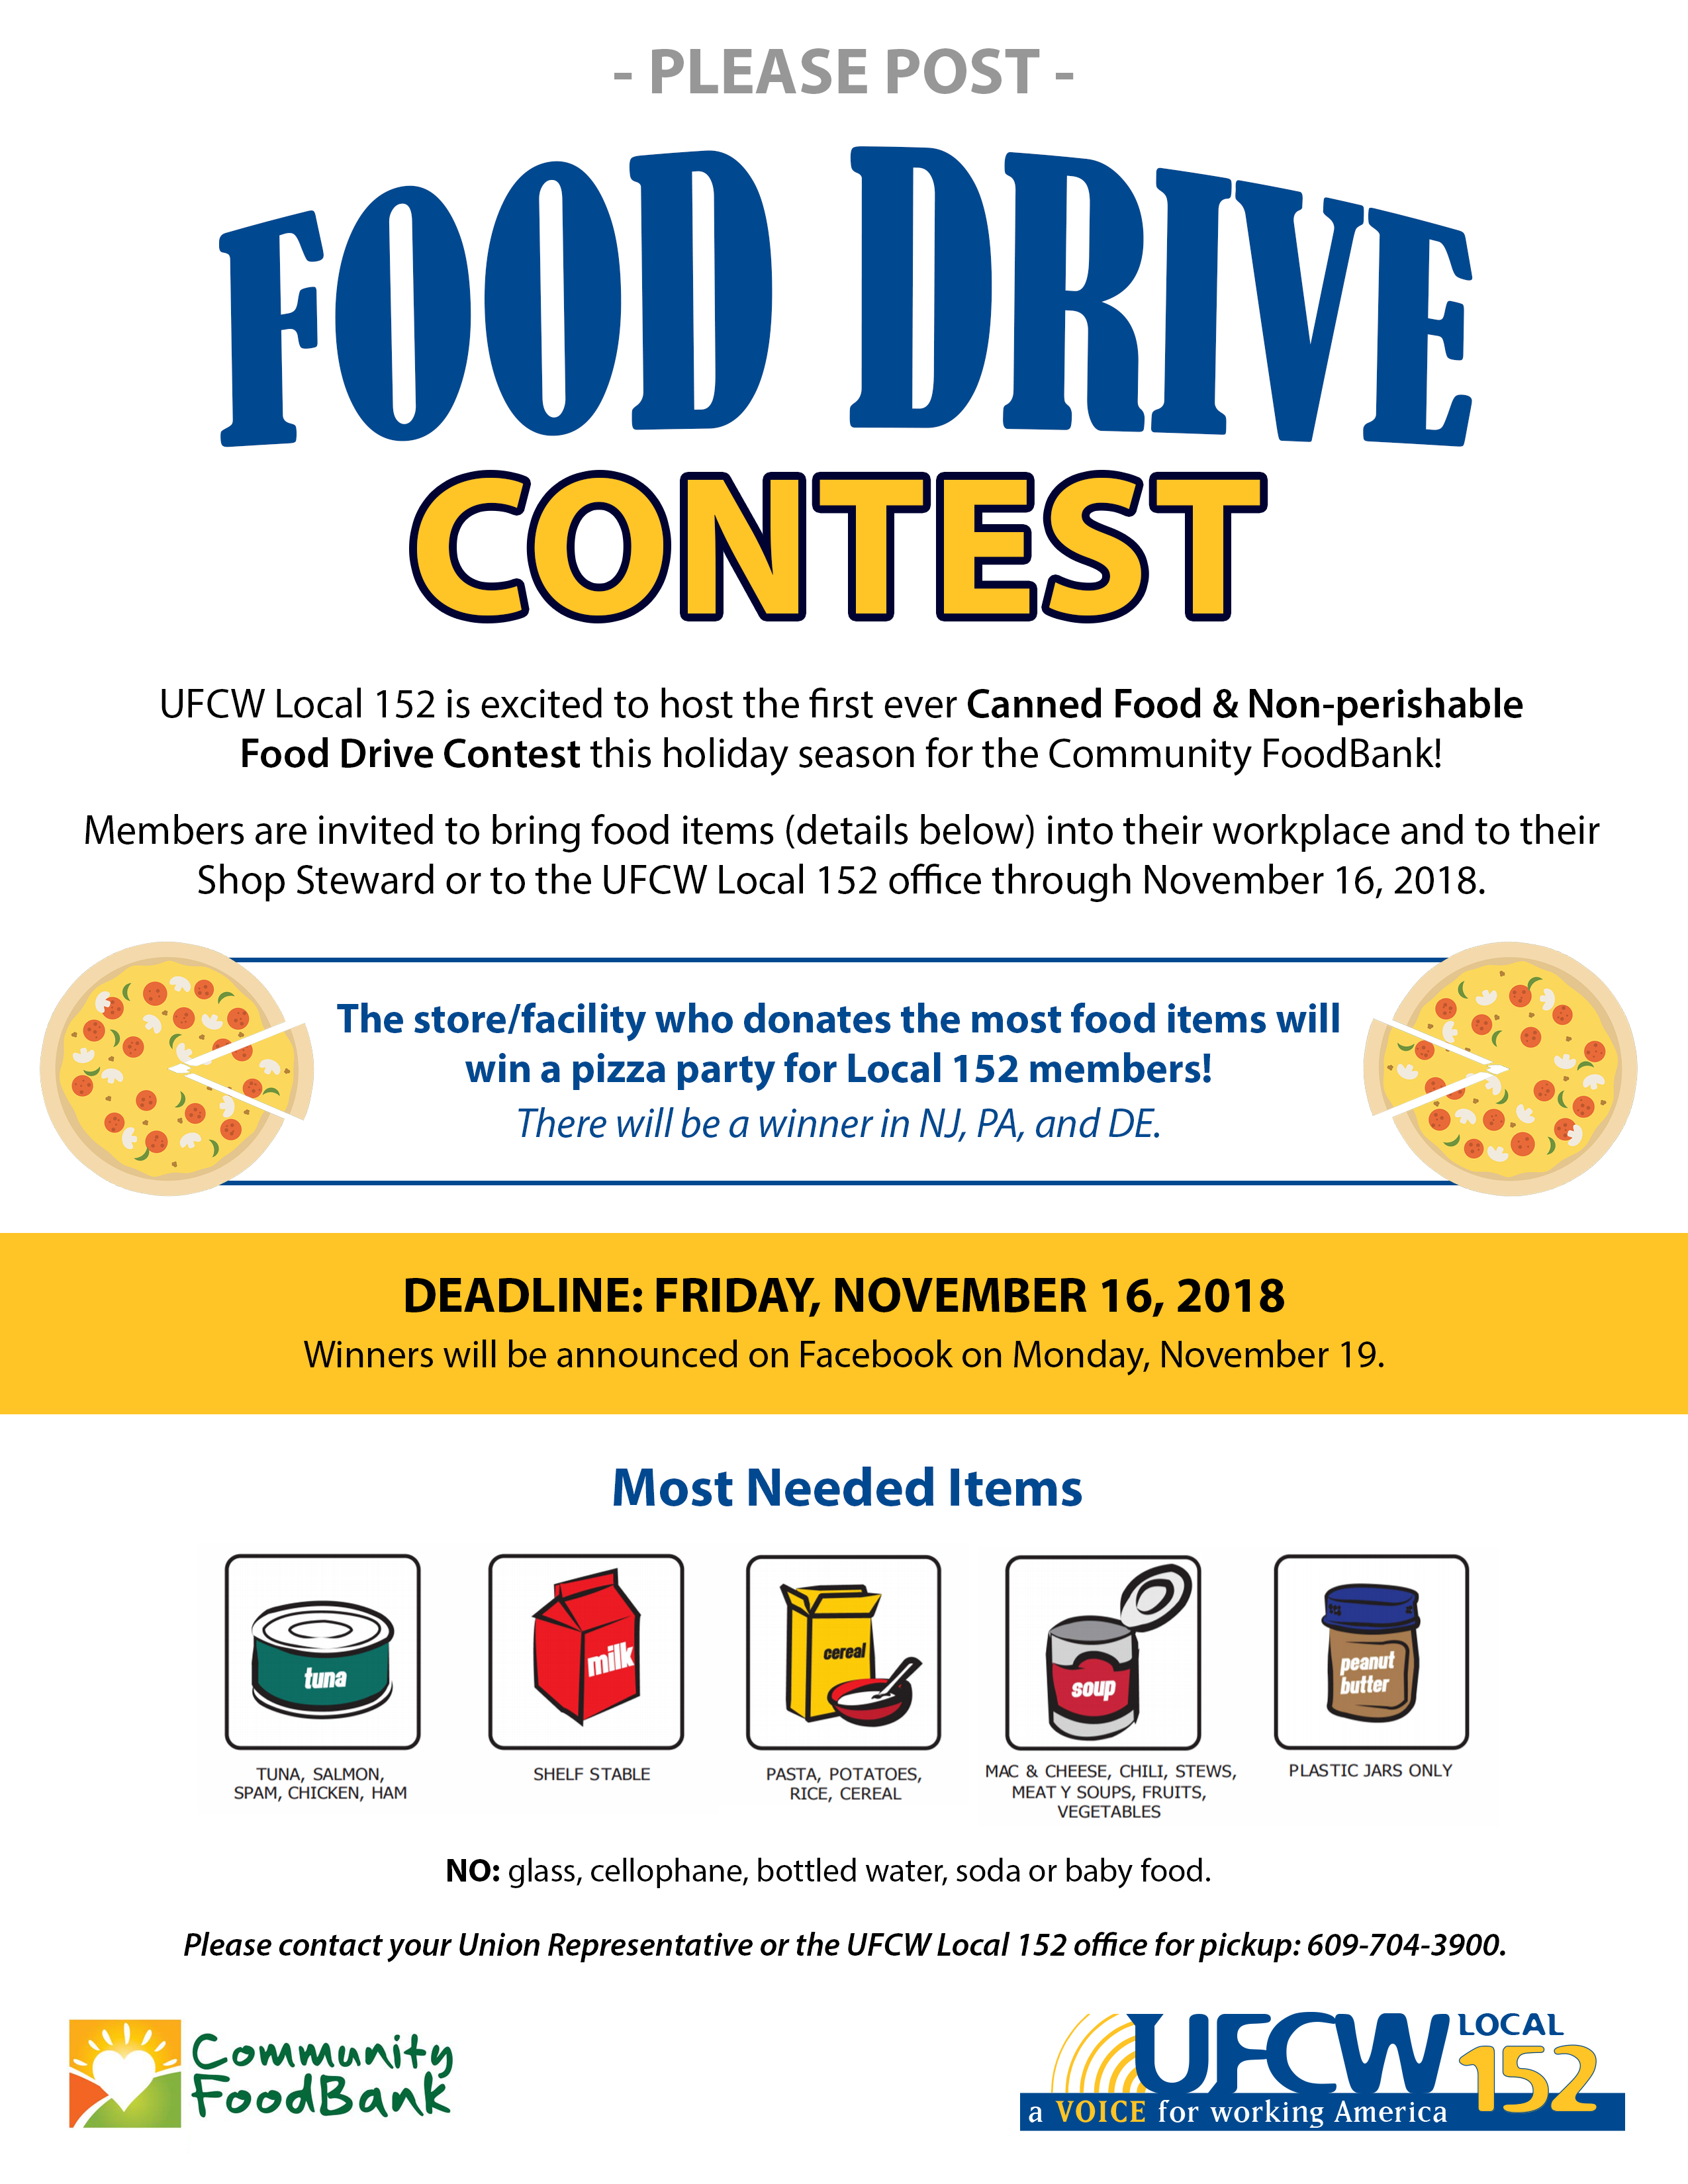 Canned Food Drive flyer